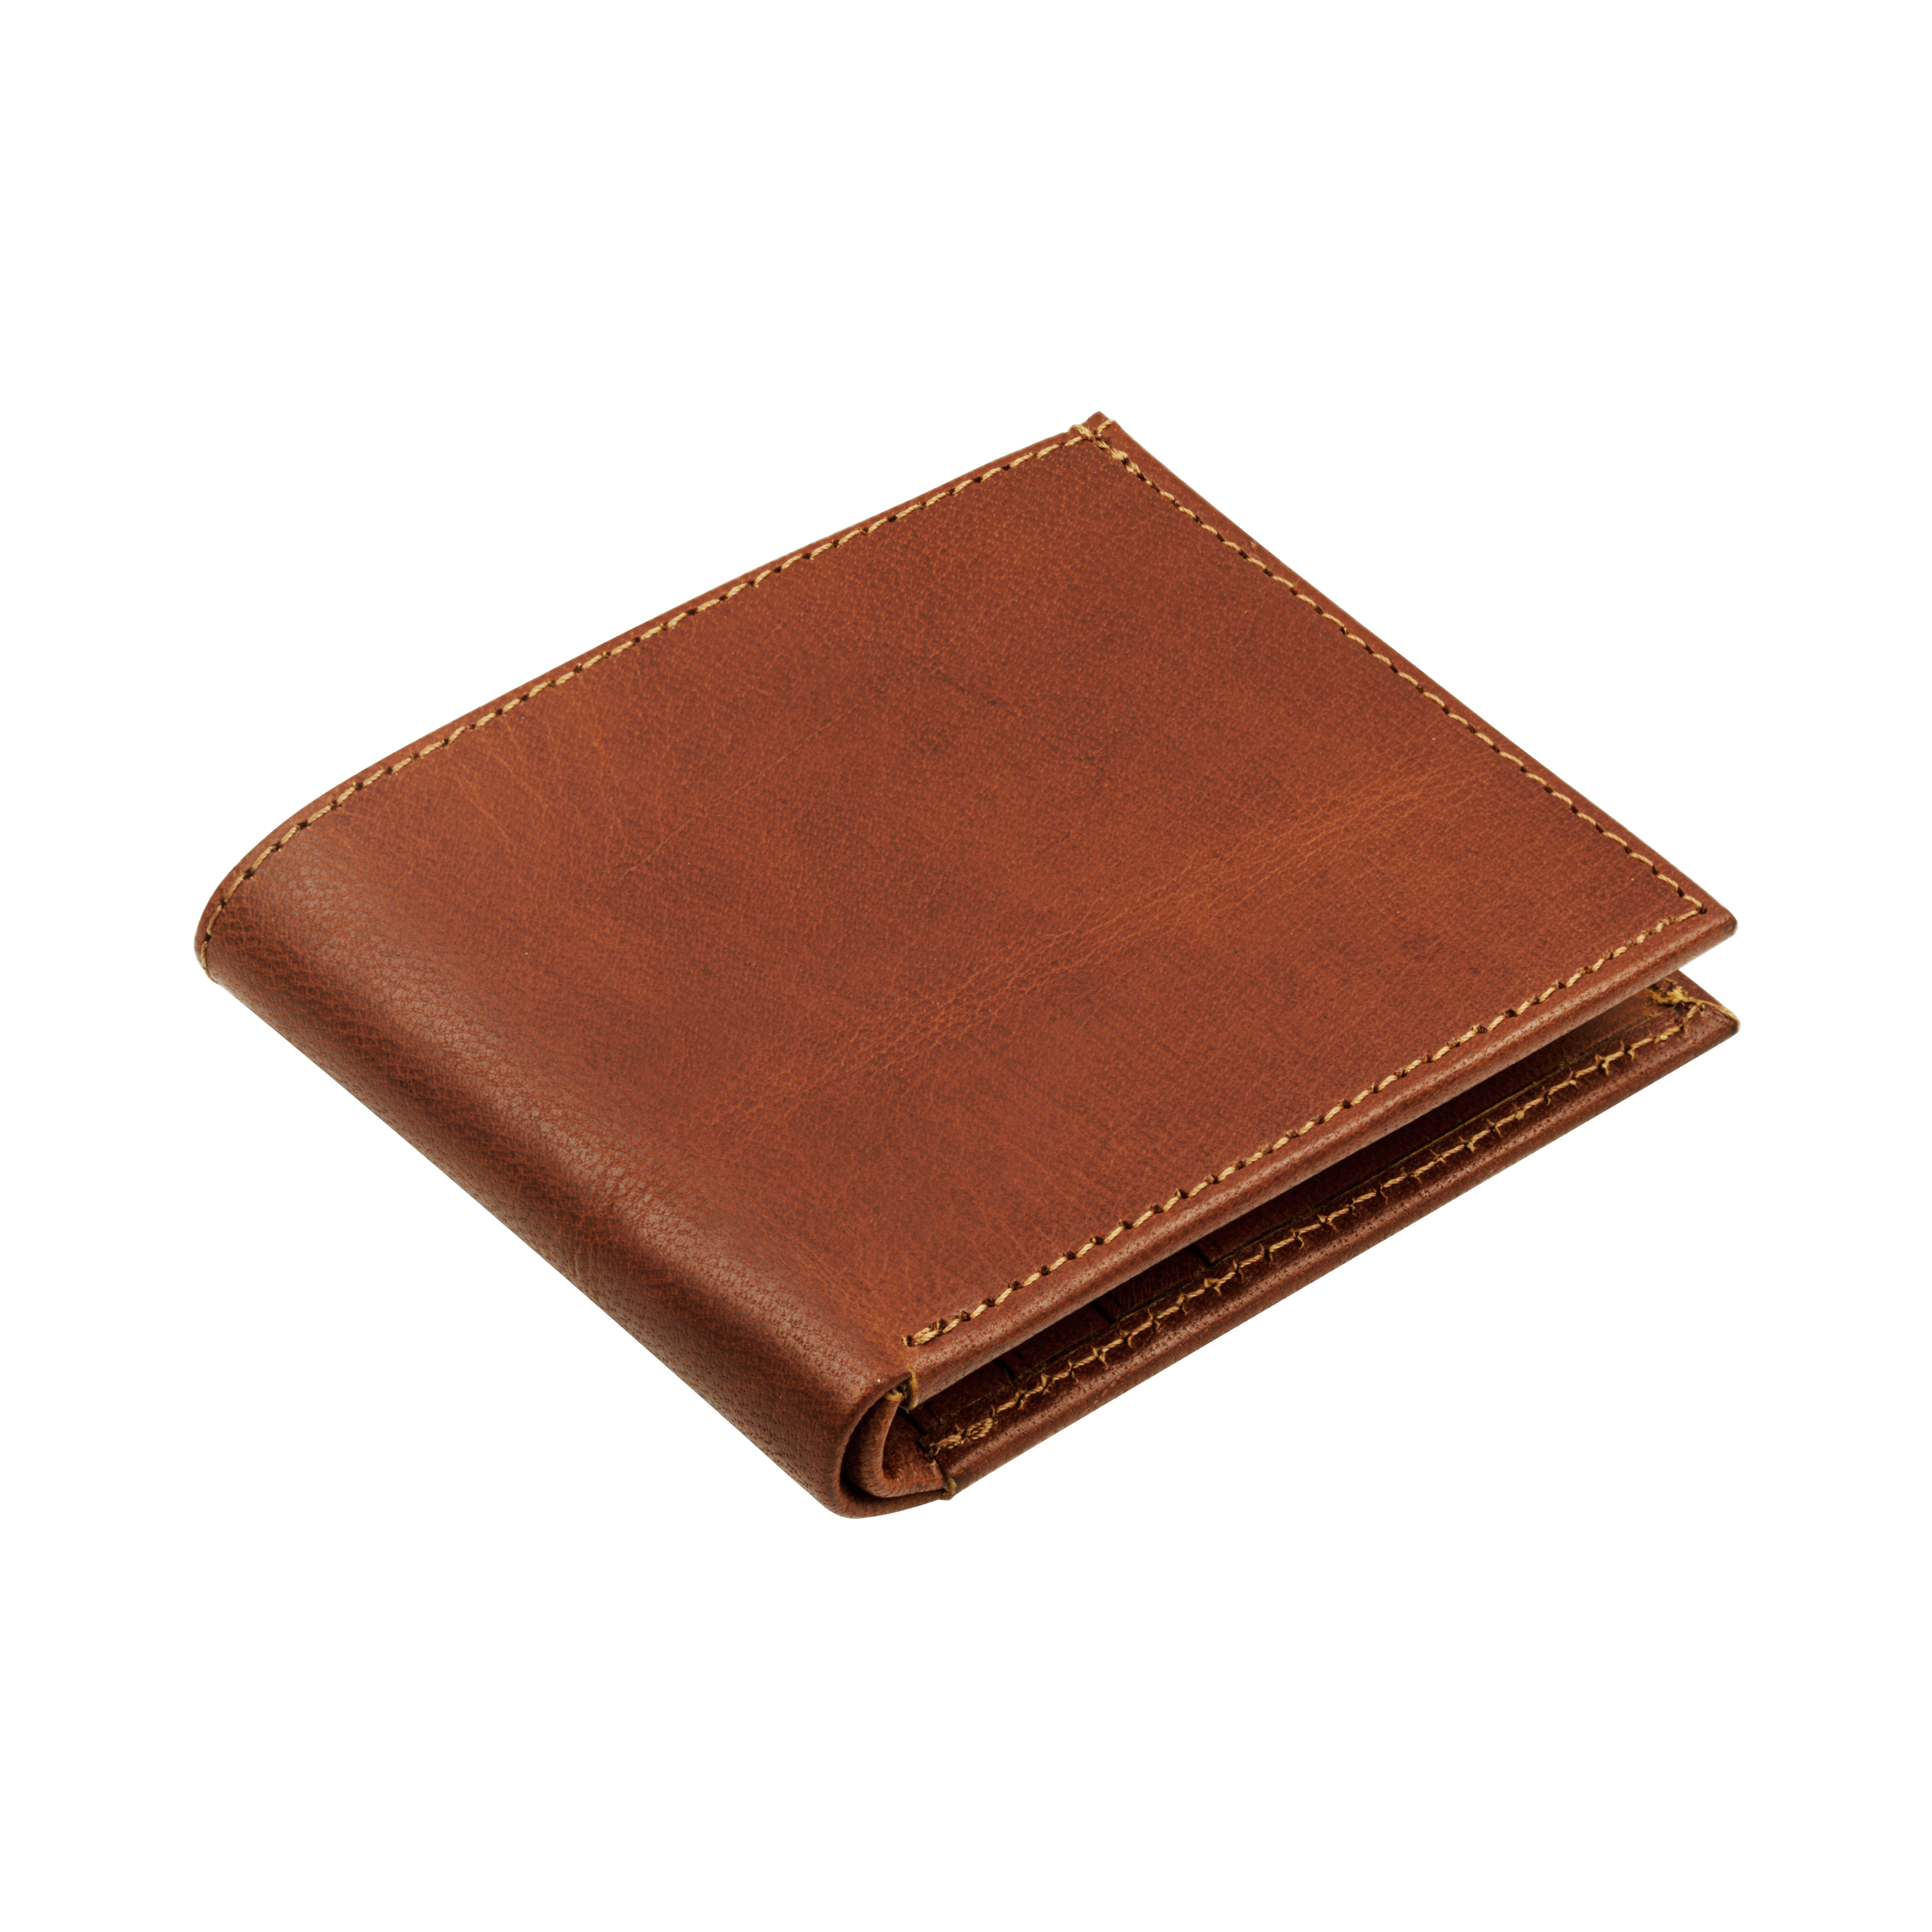 Fold Wallet - Johnny Fly - Default - Leather Bags